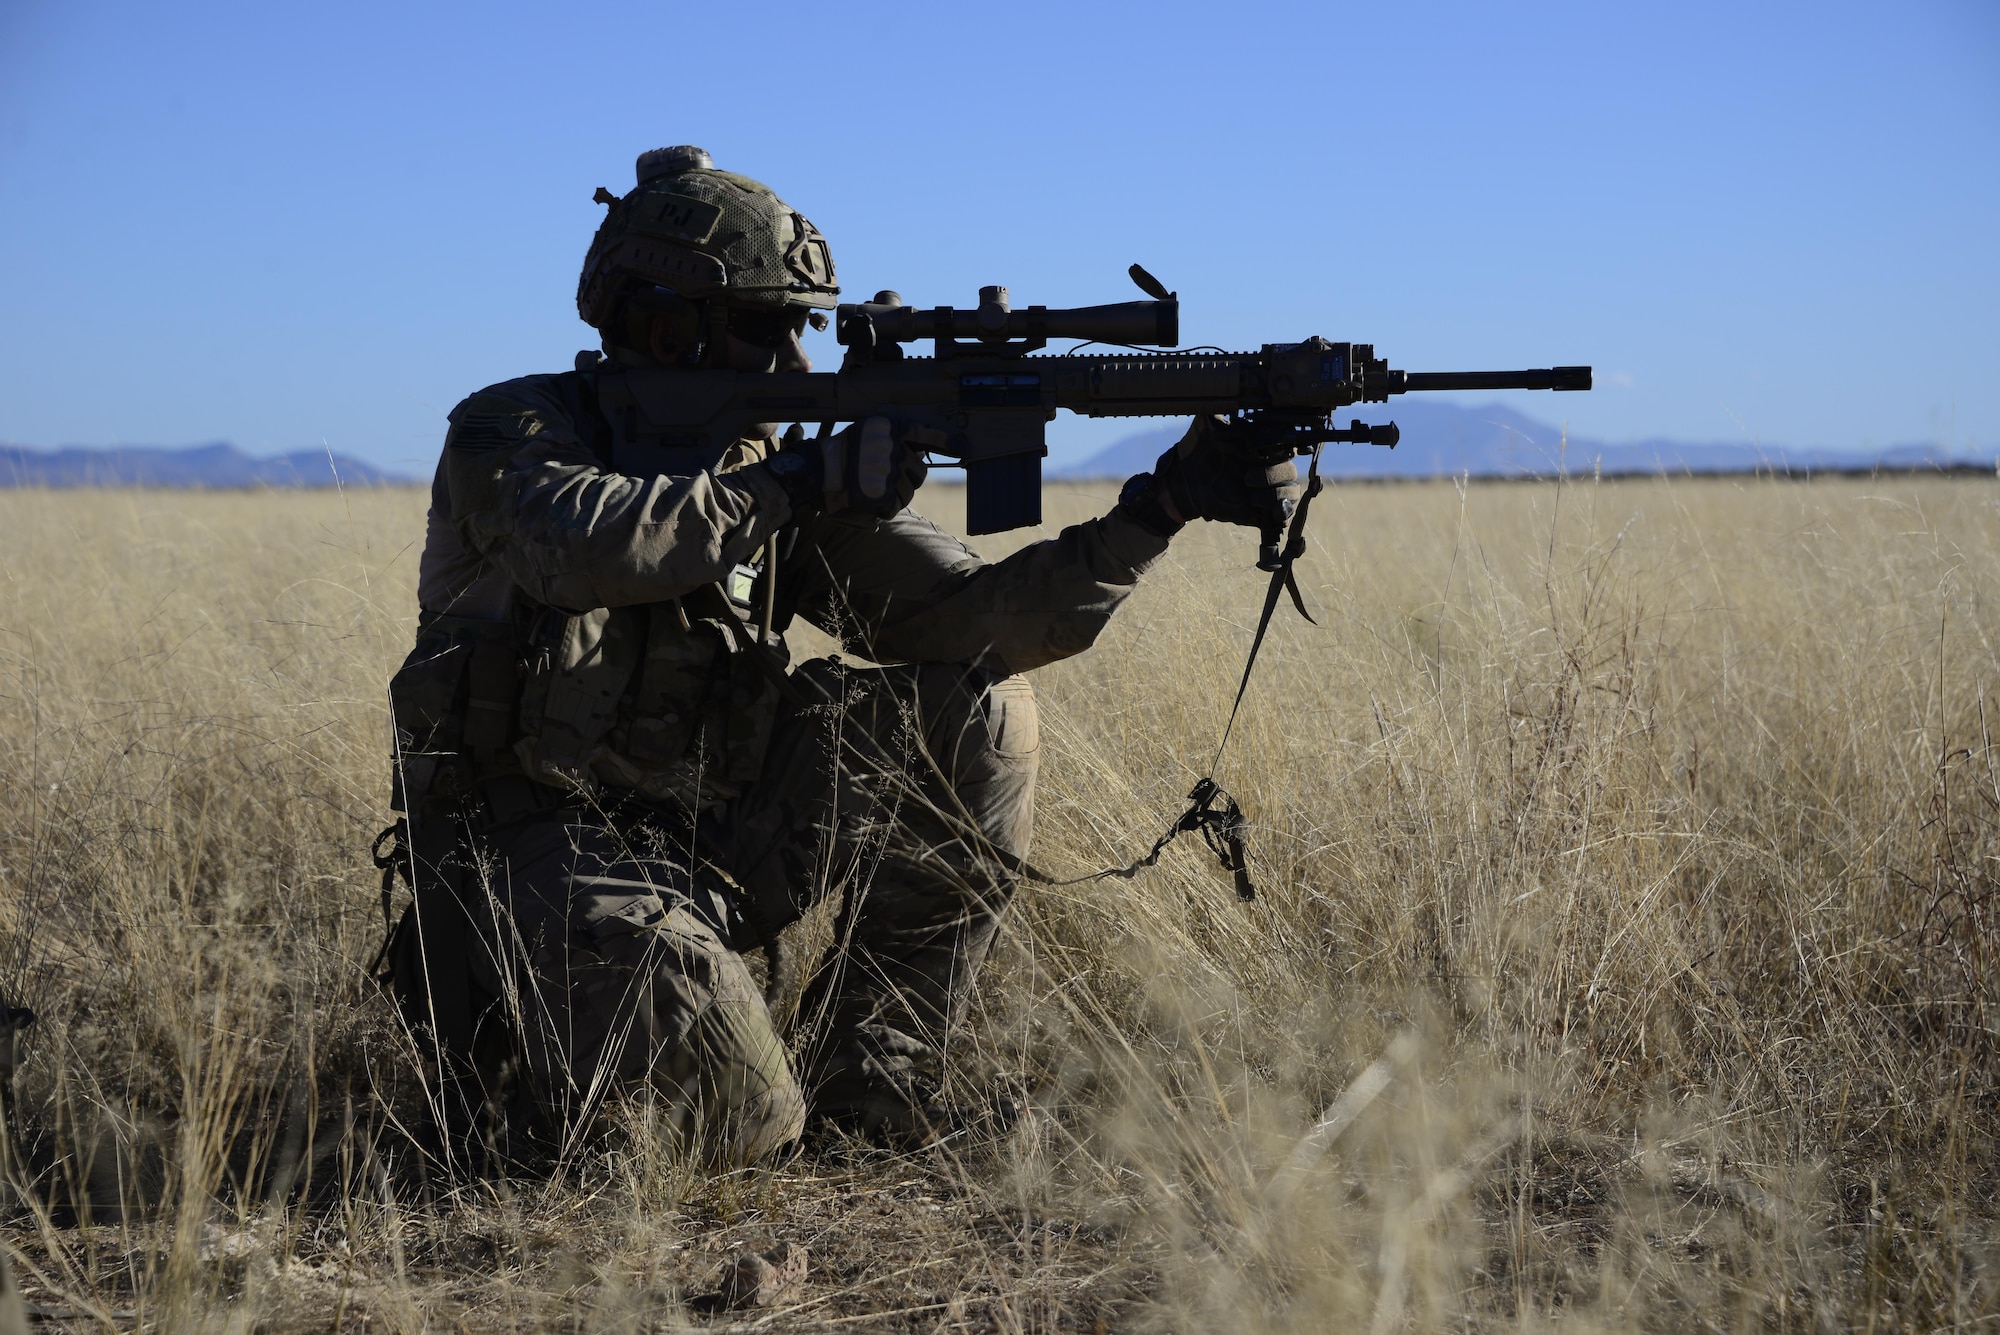 A U.S. Air Force pararescueman from the 48th Rescue Squadron fires a blank round toward simulated opposing forces during a mass casualty exercise at Fort Huachuca, Ariz., Dec. 8, 2016. During the exercise, pararescuemen were expected to triage, treat and evacuate casualties, and to eliminate any presence of simulated opposing forces. (U.S. Air Force photo by Senior Airman Betty R. Chevalier)